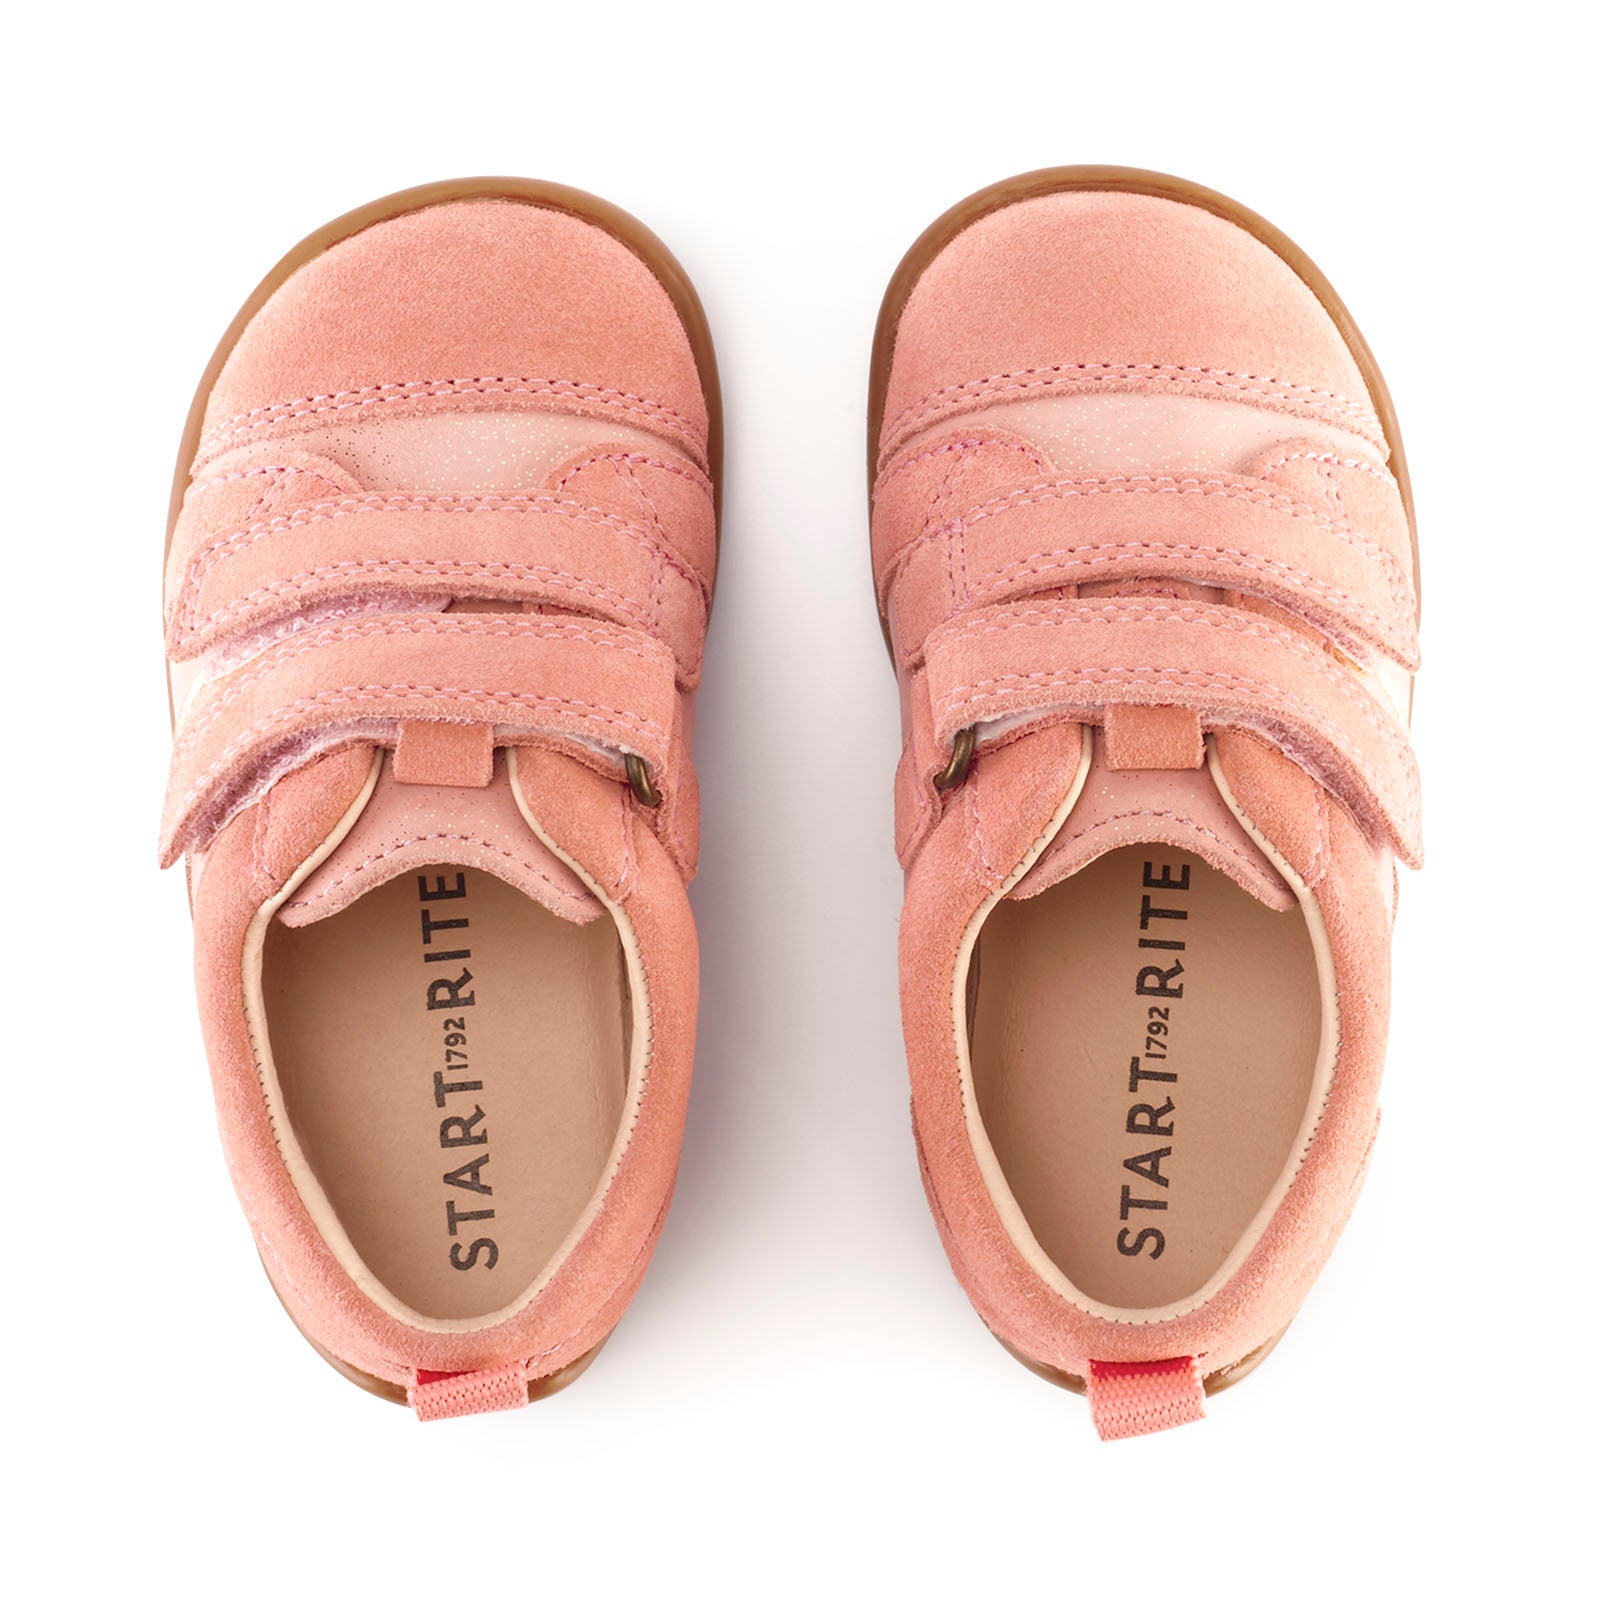 A pair of girls casual shoes by Start Rite, style Maze, in pink and gold with double velcro fastening. Above view.